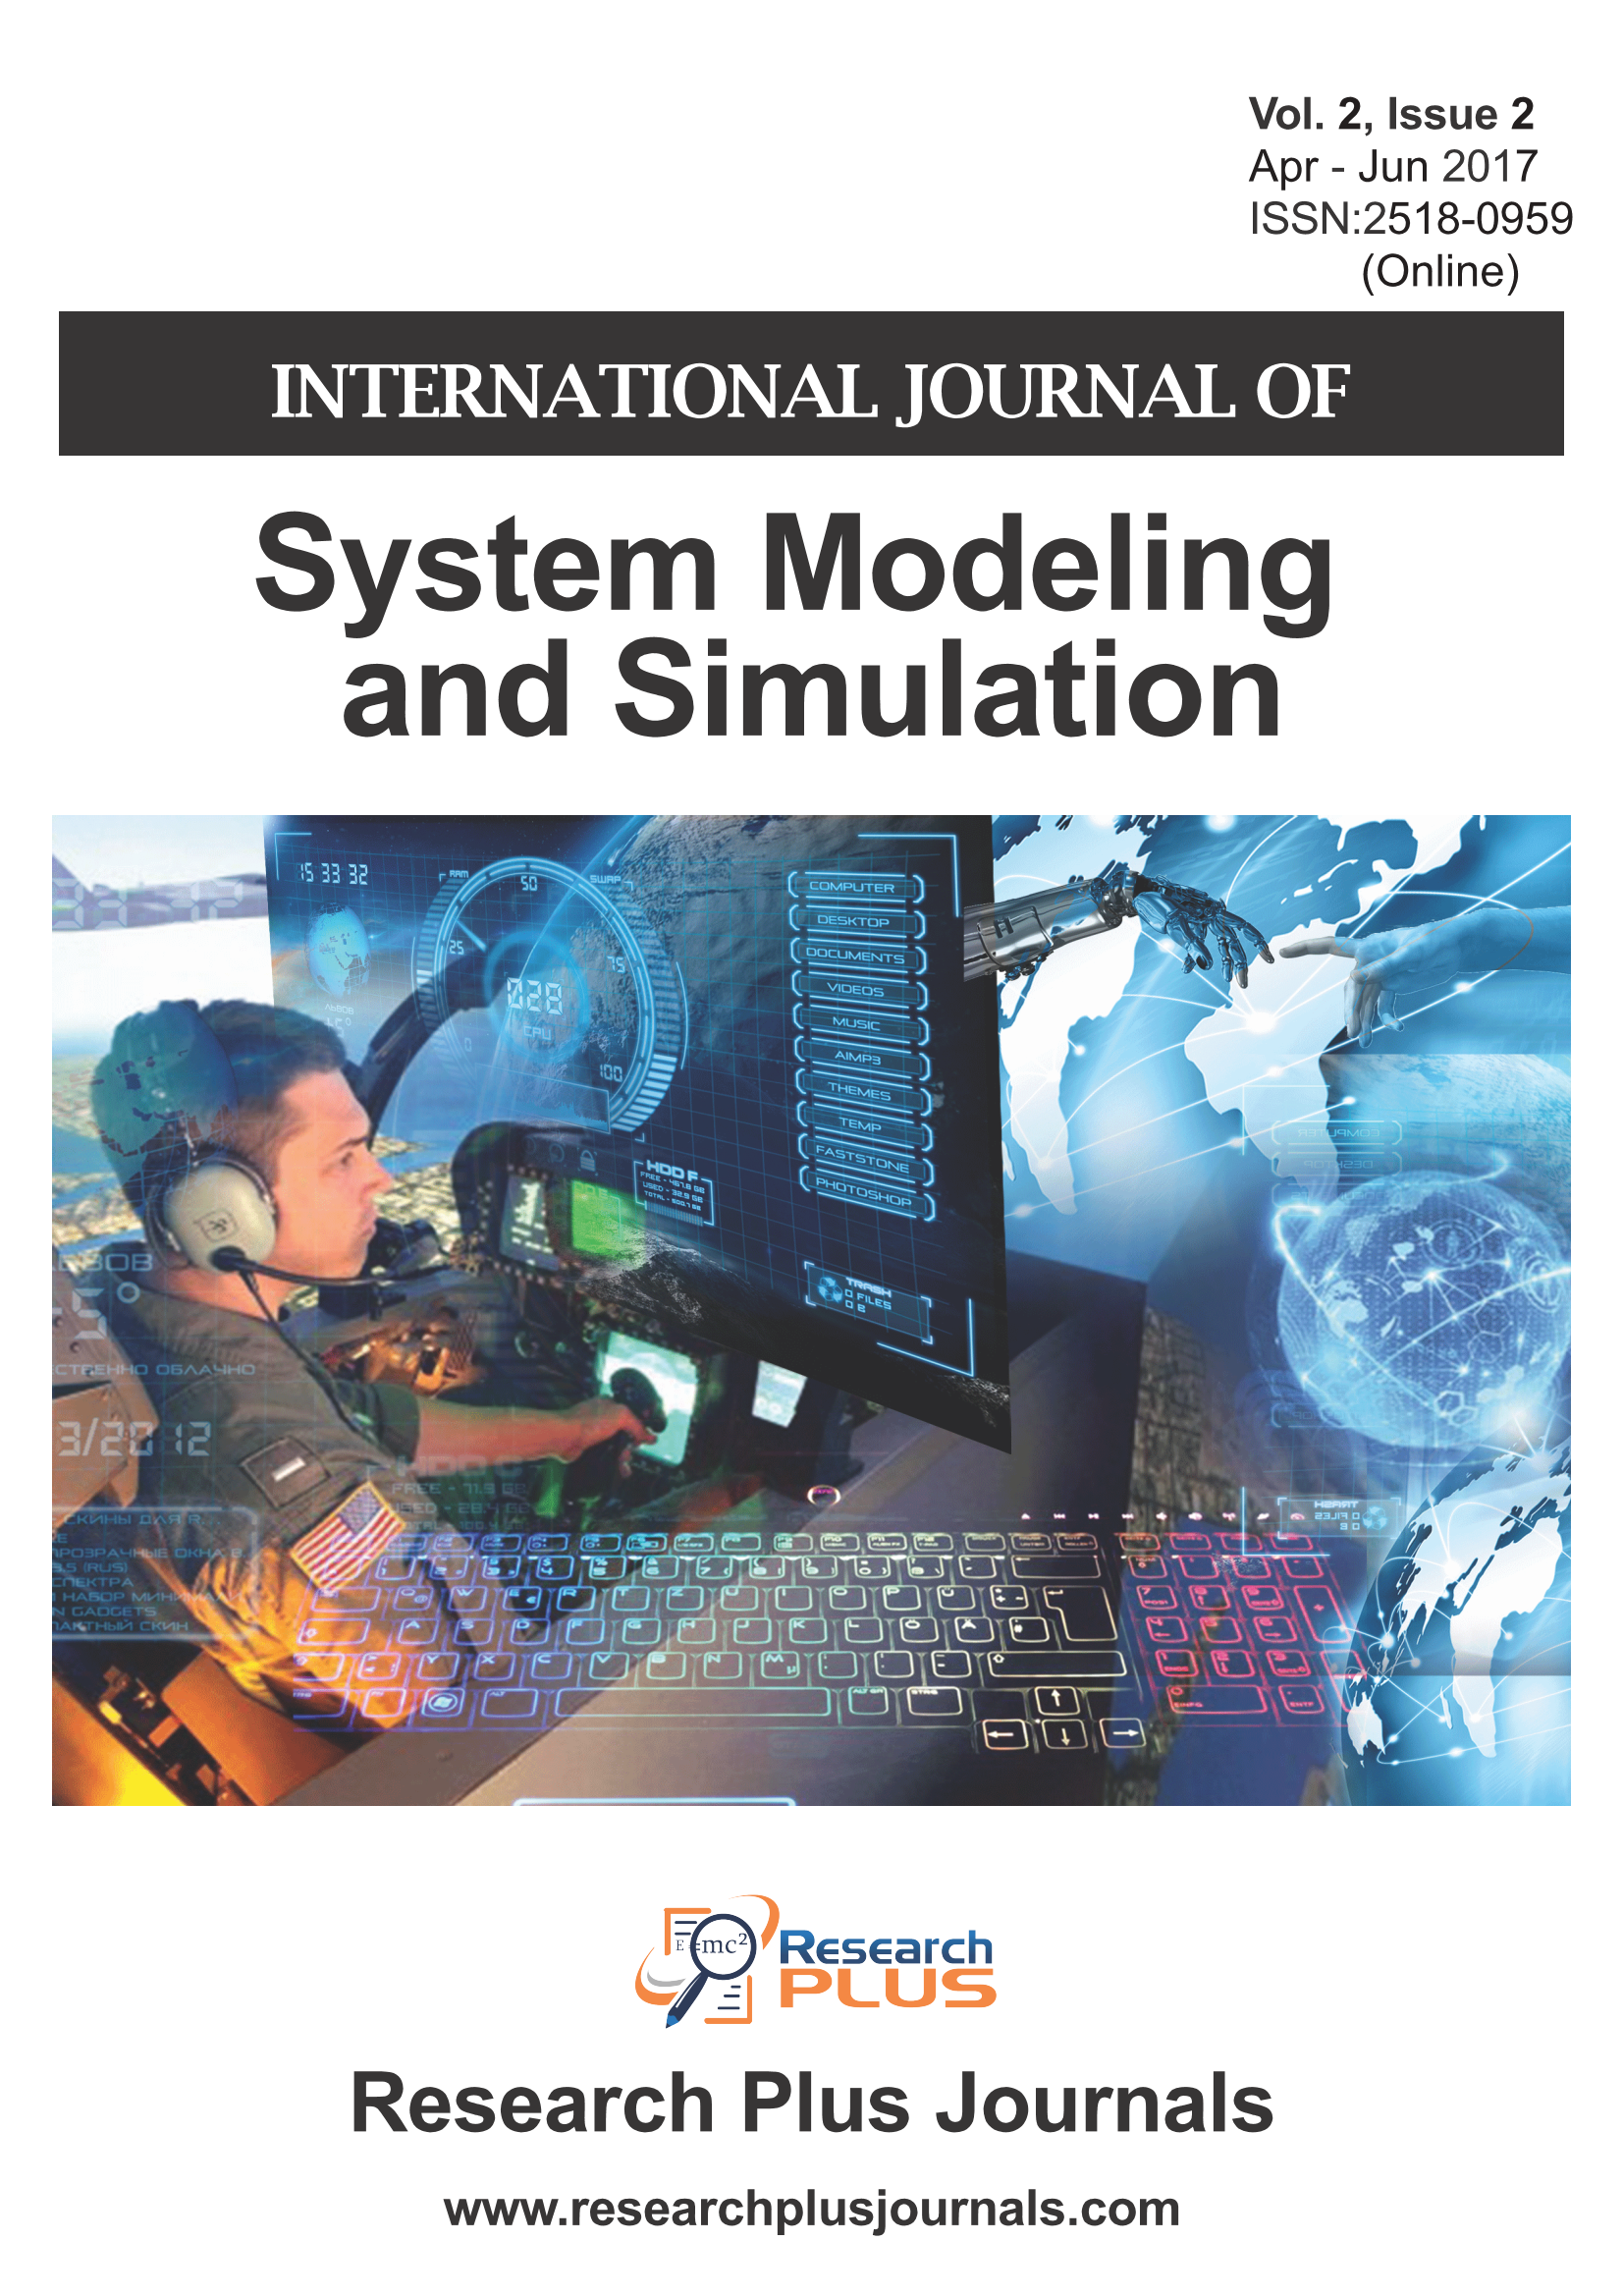 International Journal of System Modeling and Simulation (ISSN Online: 2518-0959) - Vol.2, Issue 2